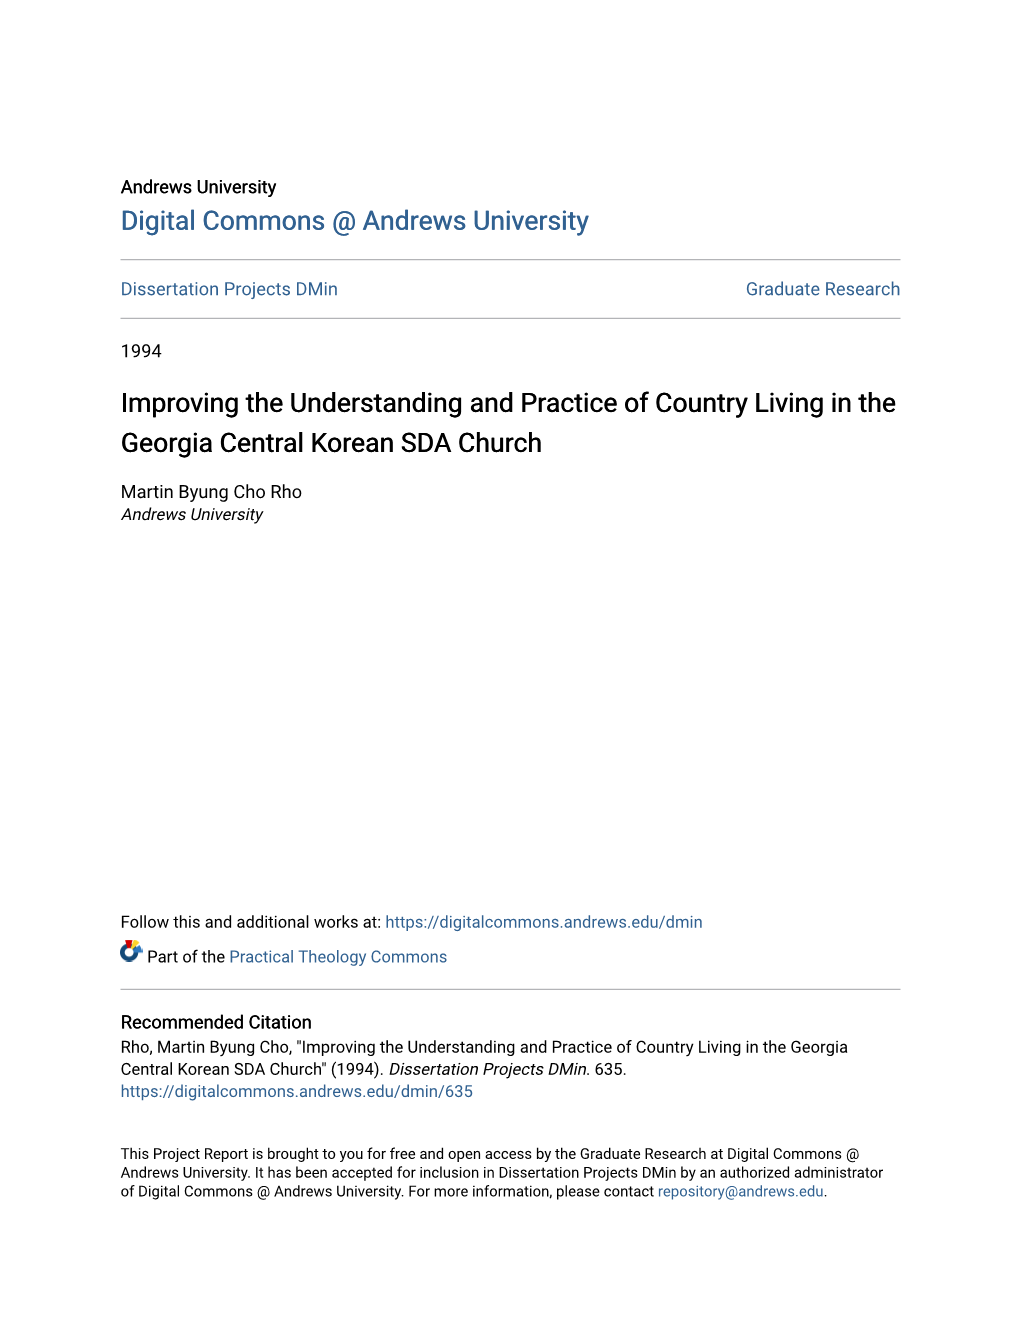 Improving the Understanding and Practice of Country Living in the Georgia Central Korean SDA Church